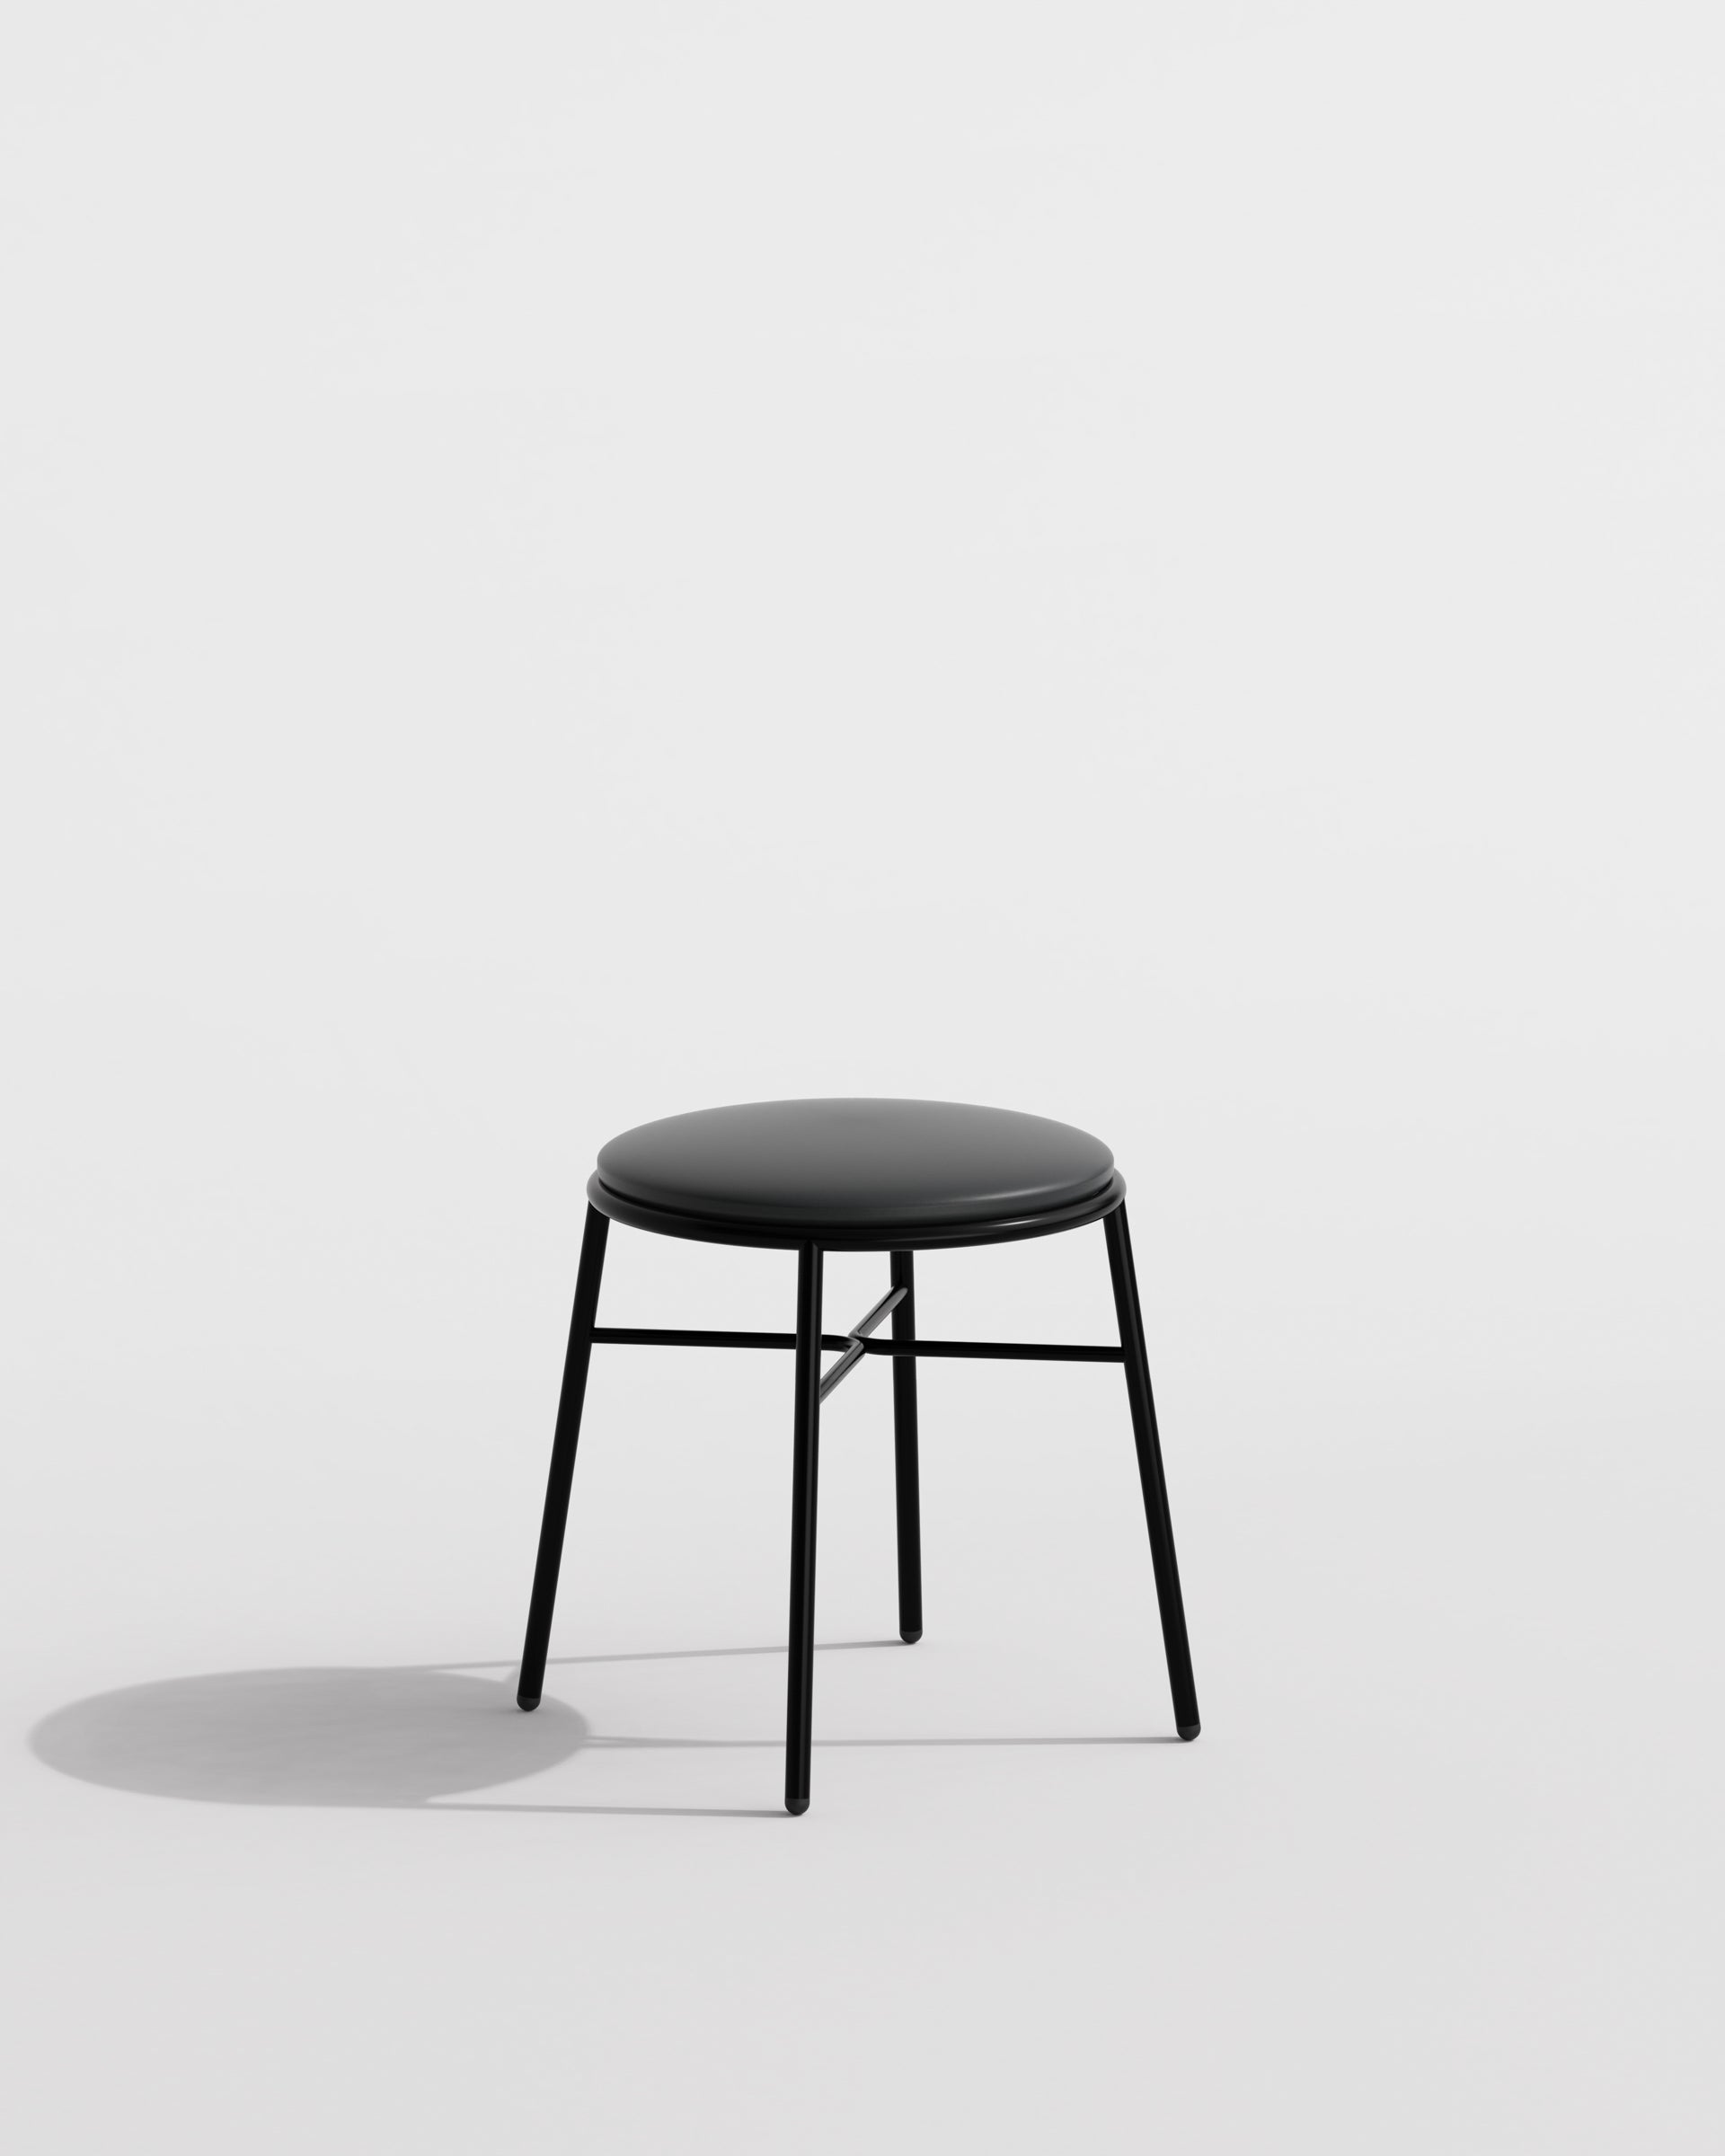 Piper Stool Upholstered | Fabric or Leather Seat | Stackable | Designed by GibsonKarlo | DesignByThem